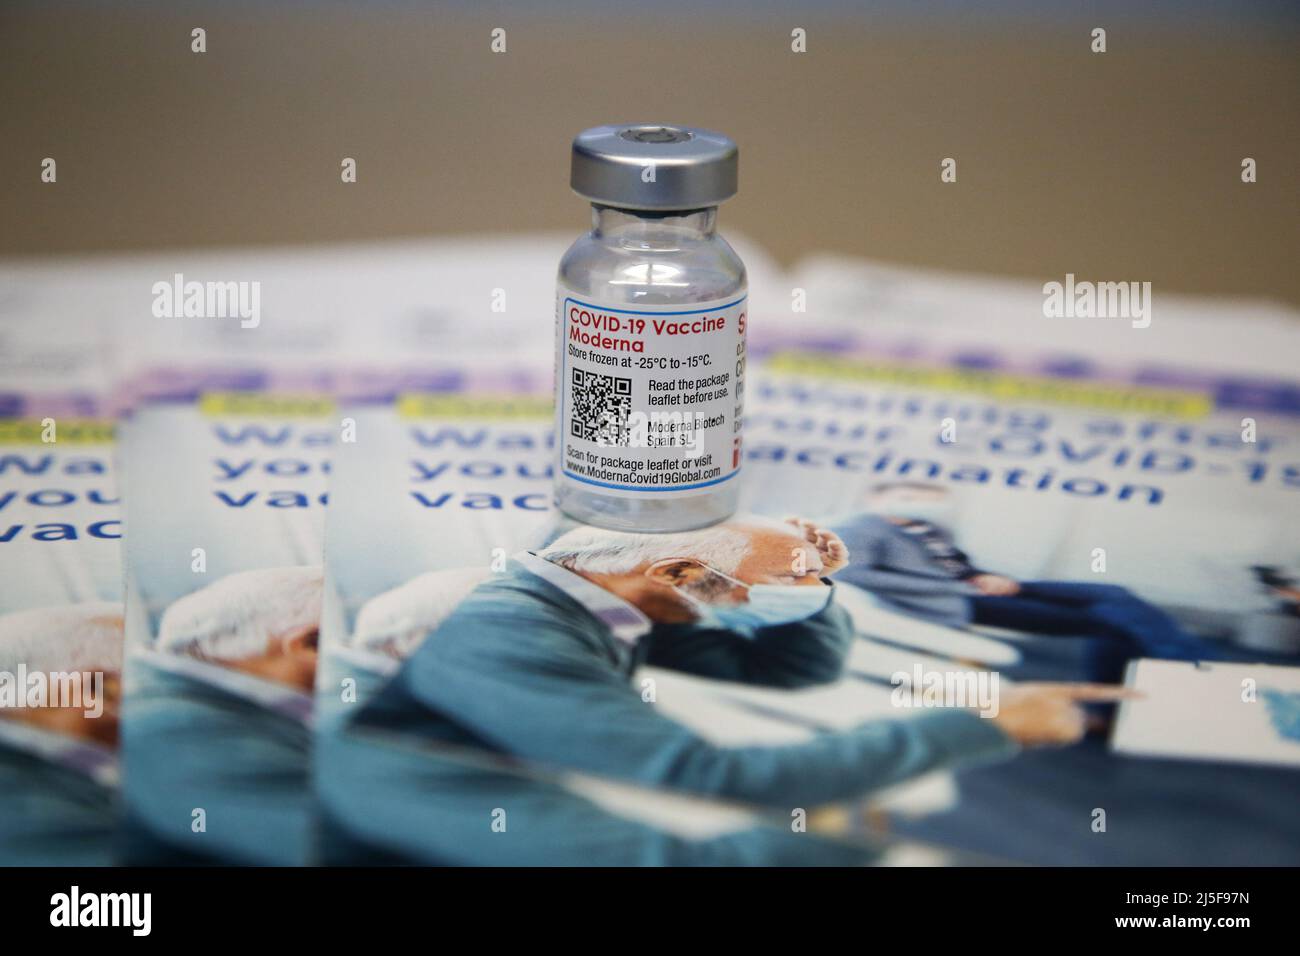 London, UK 22 Apr 2022 - A vail containing the Spikevax (Moderna) COVID-19 vaccine with COVID-19 vaccination information leaflet at a vaccination centre. Credit Dinendra Haria /Alamy Live News Stock Photo